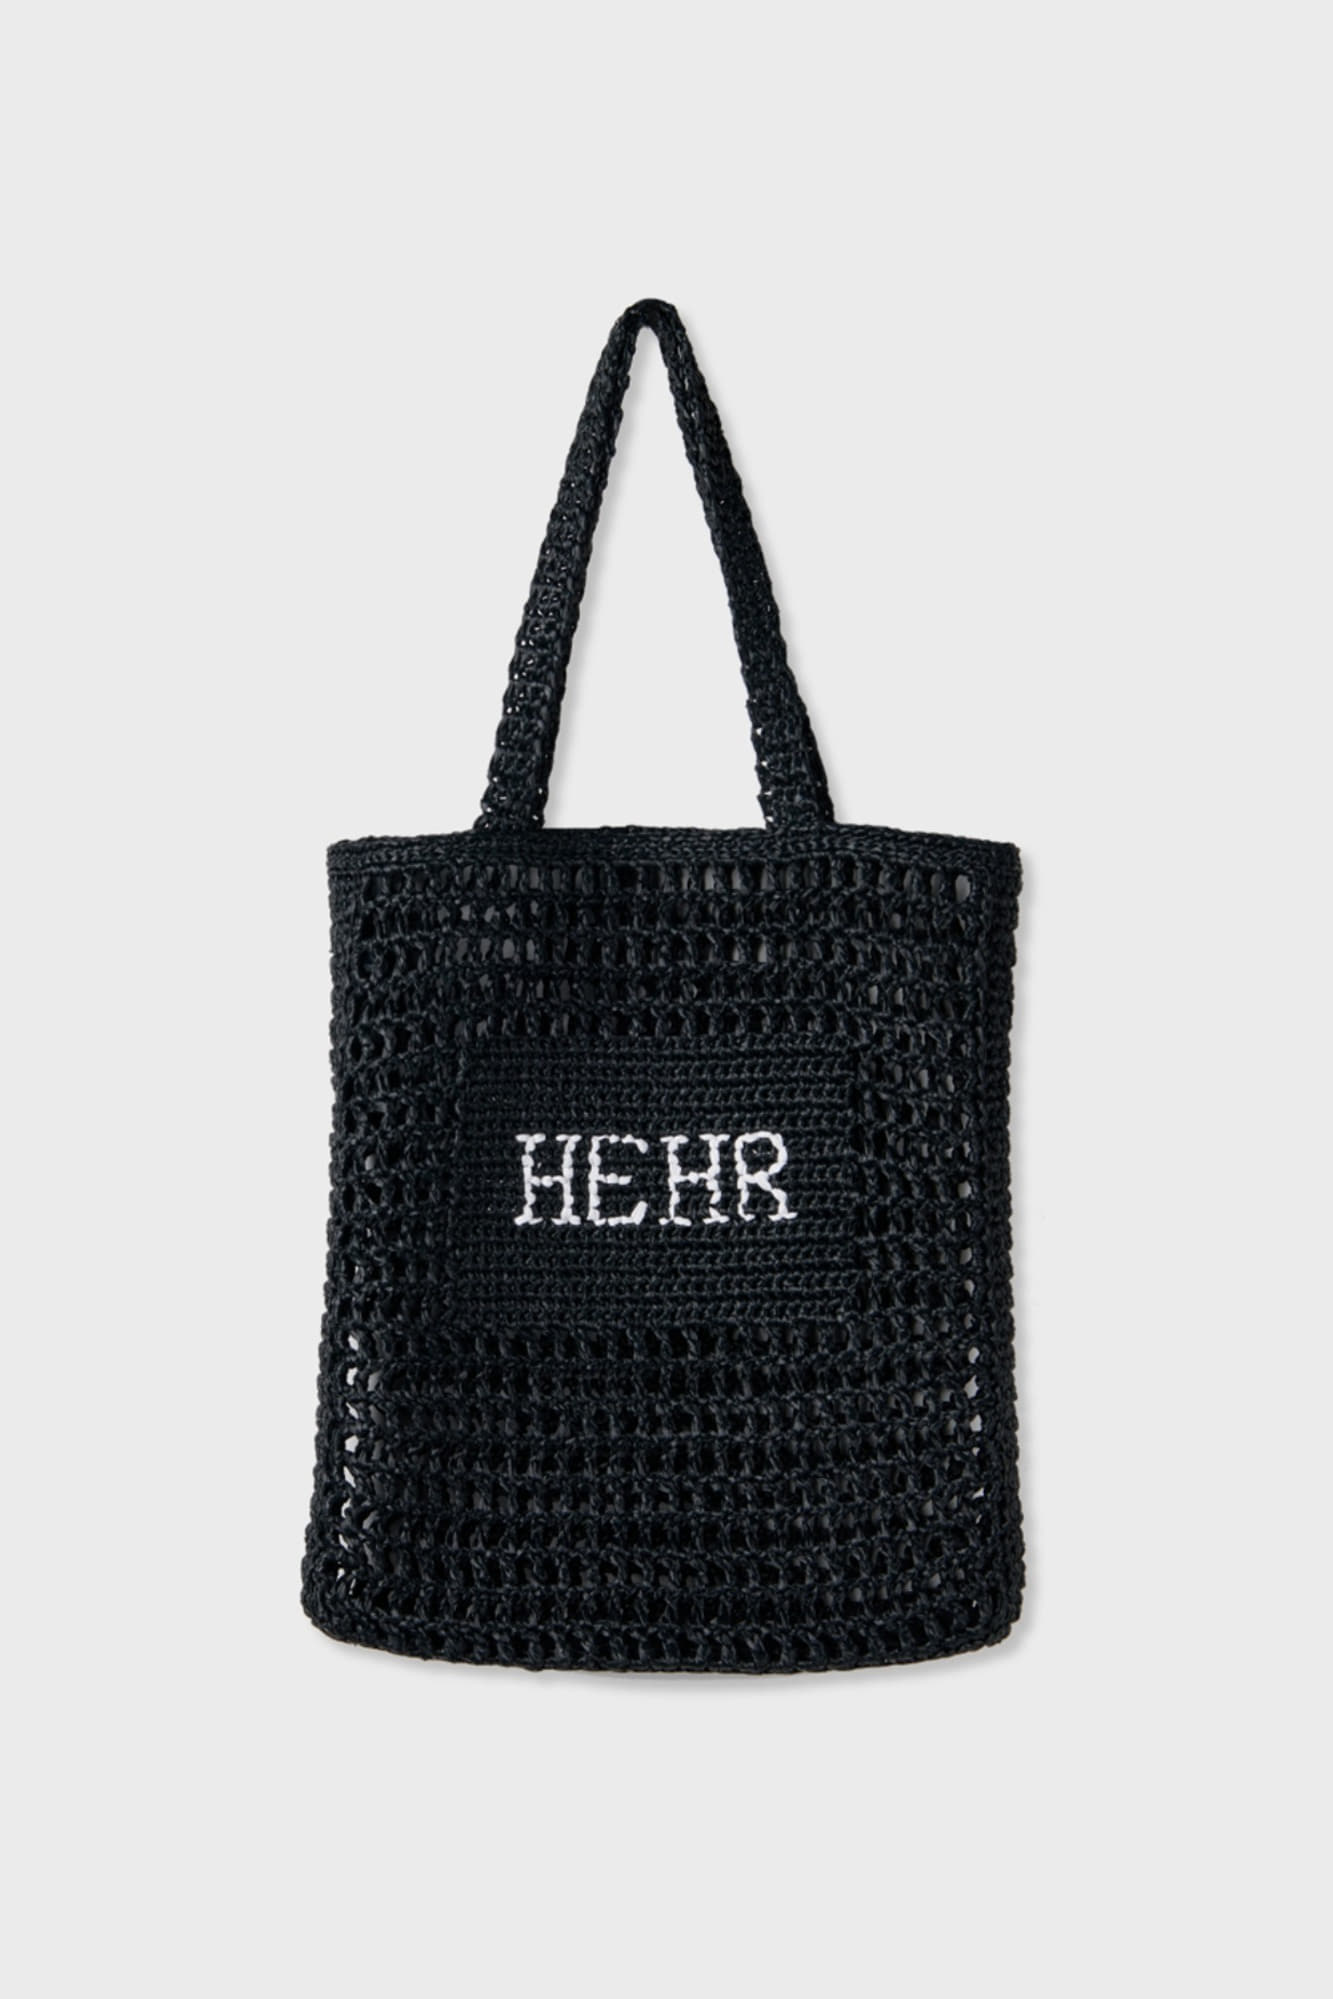 Knot Net Tote Bag